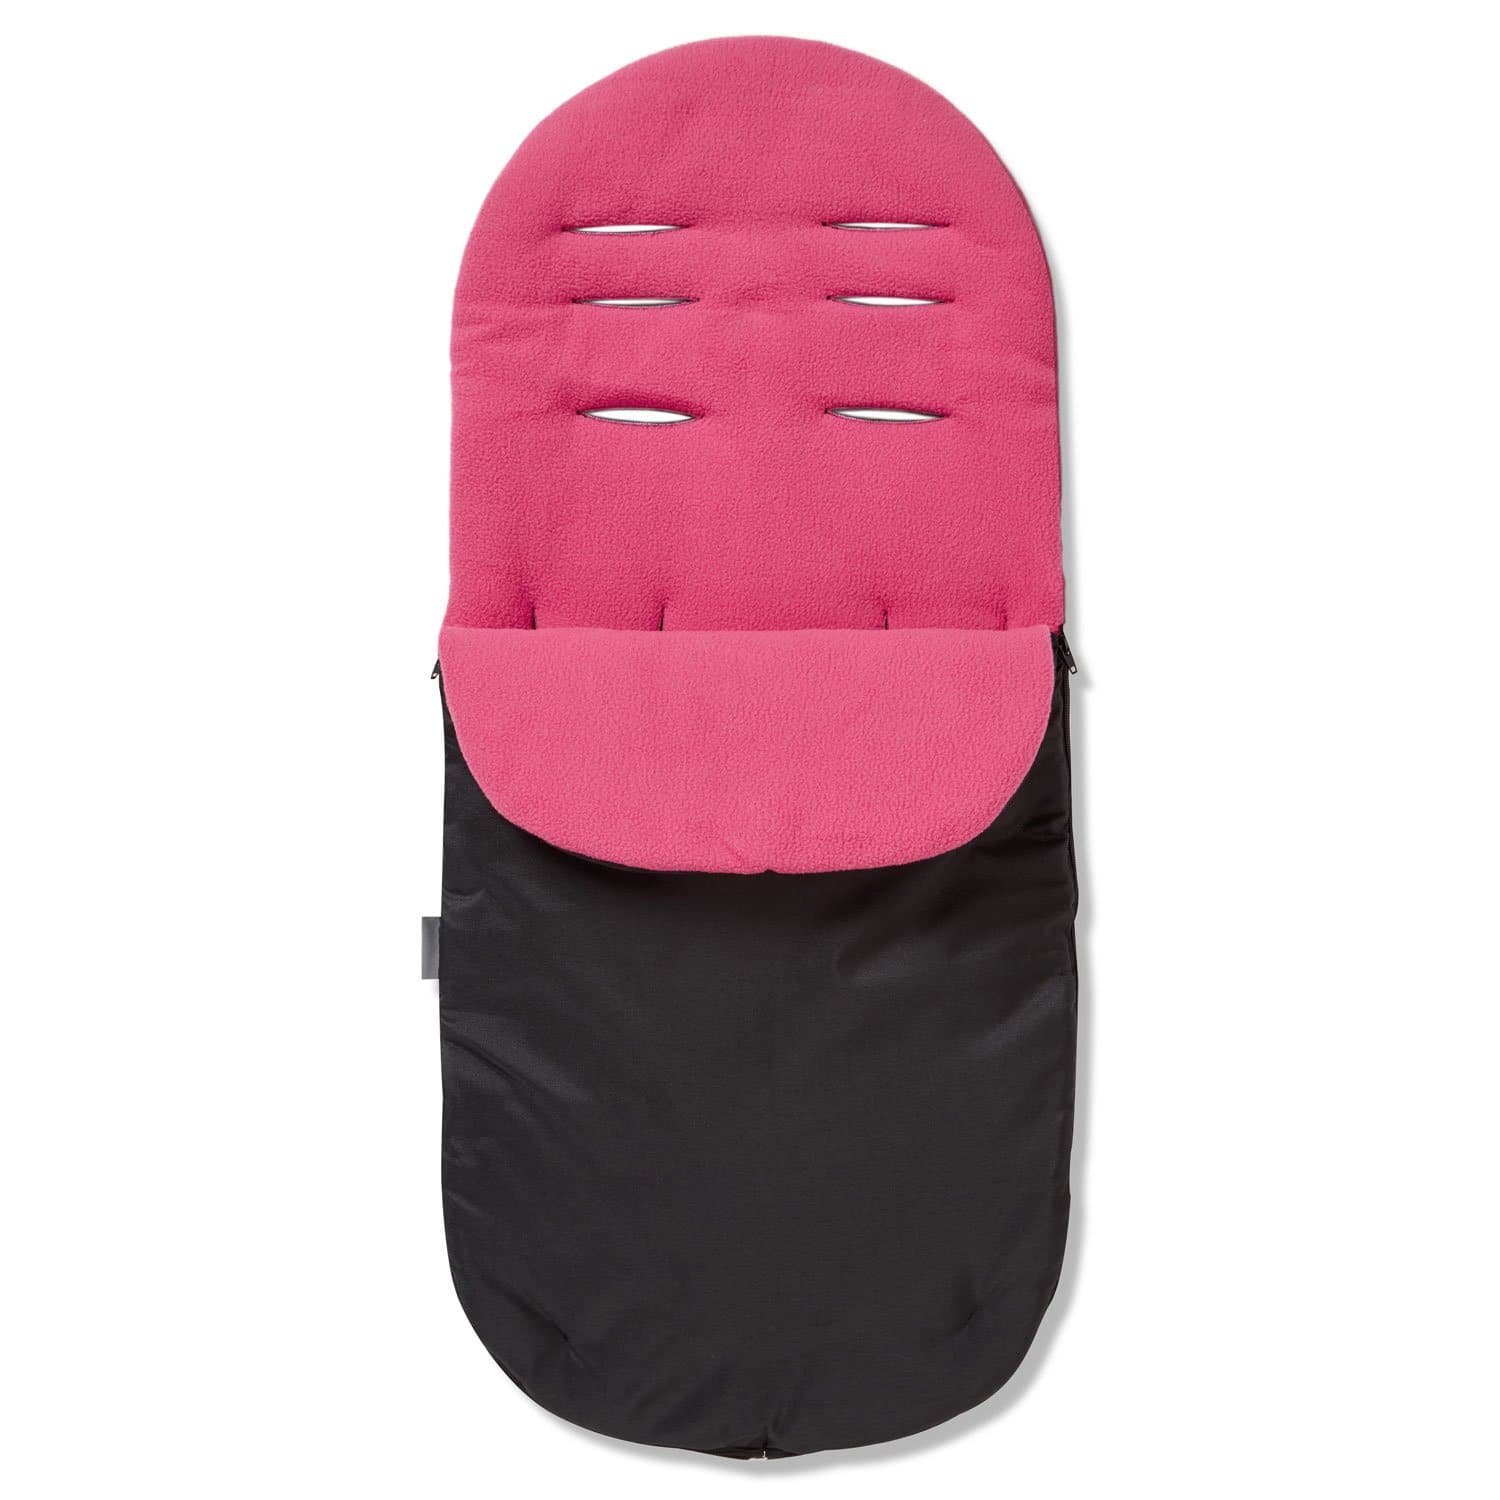 Universal Footmuff / Cosy Toes - Fits All Pushchairs / Prams And Buggies - Dark Pink / Fits All Models | For Your Little One